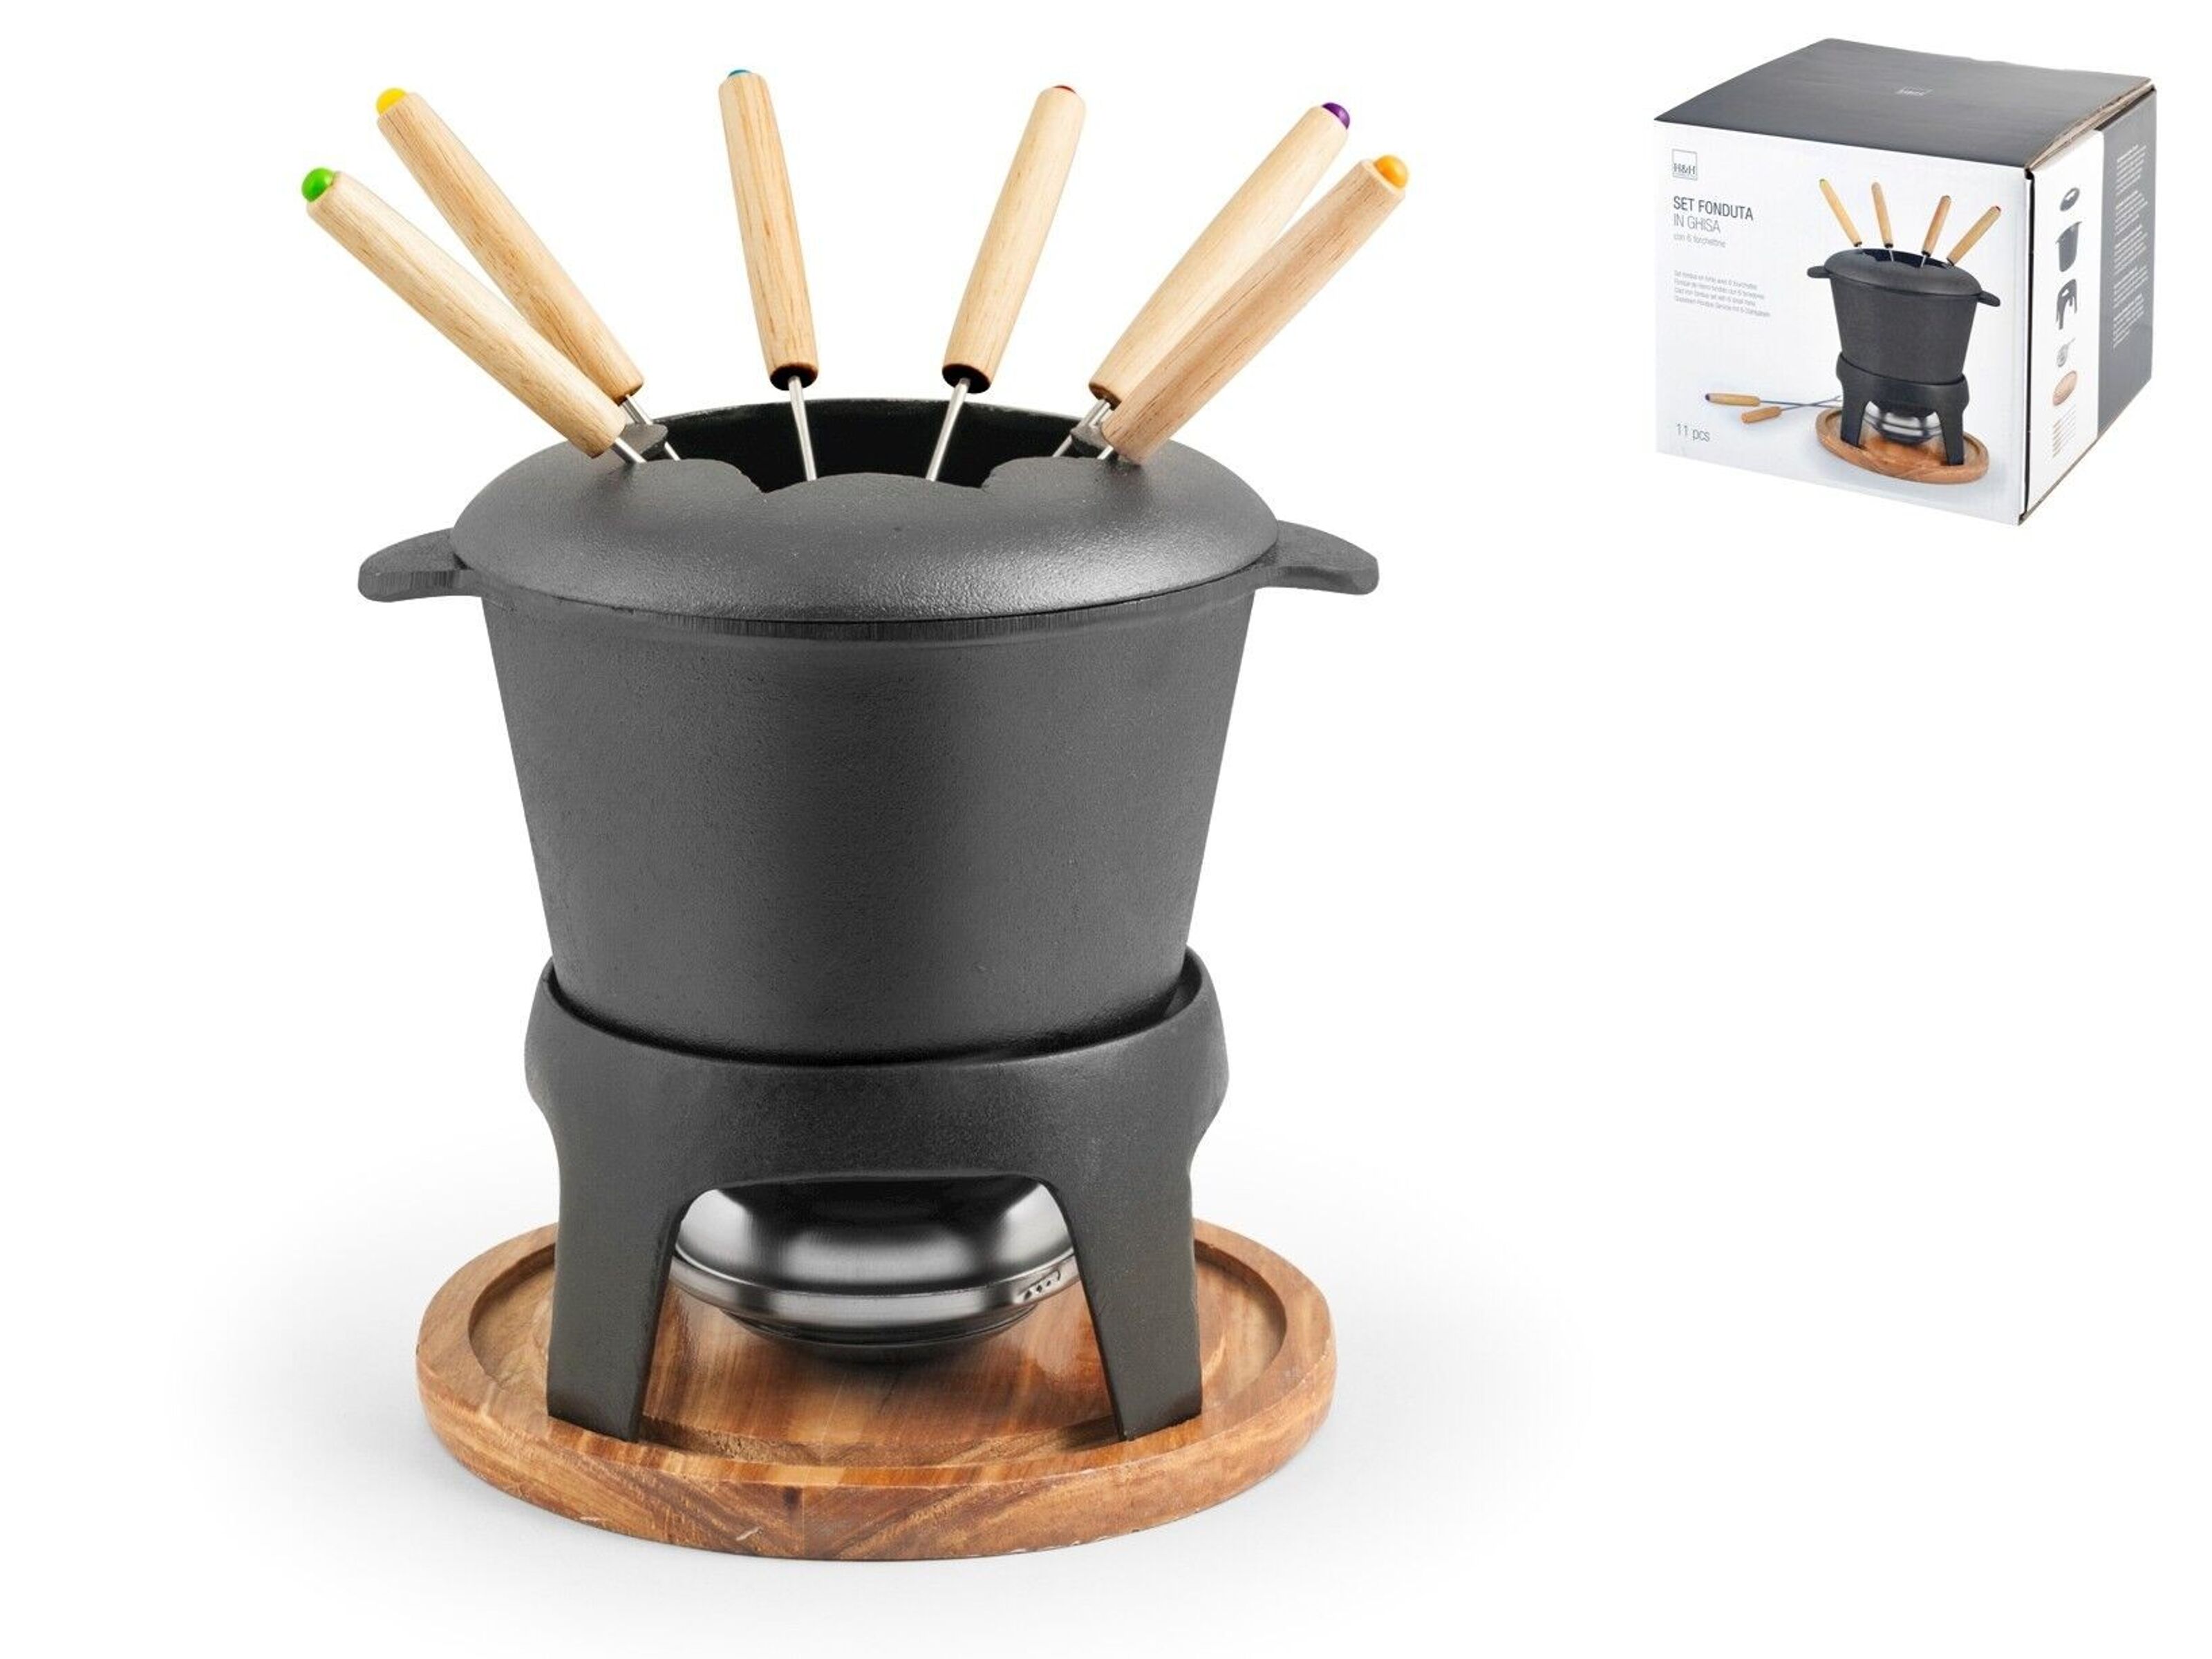 Buy wholesale 11-piece fondue set in cast iron with wooden base. Consisting  of: 6 stainless steel forks with wooden handle; 1 fuel paste stove; 1 cast  iron saucepan 21x16x10 h cm with